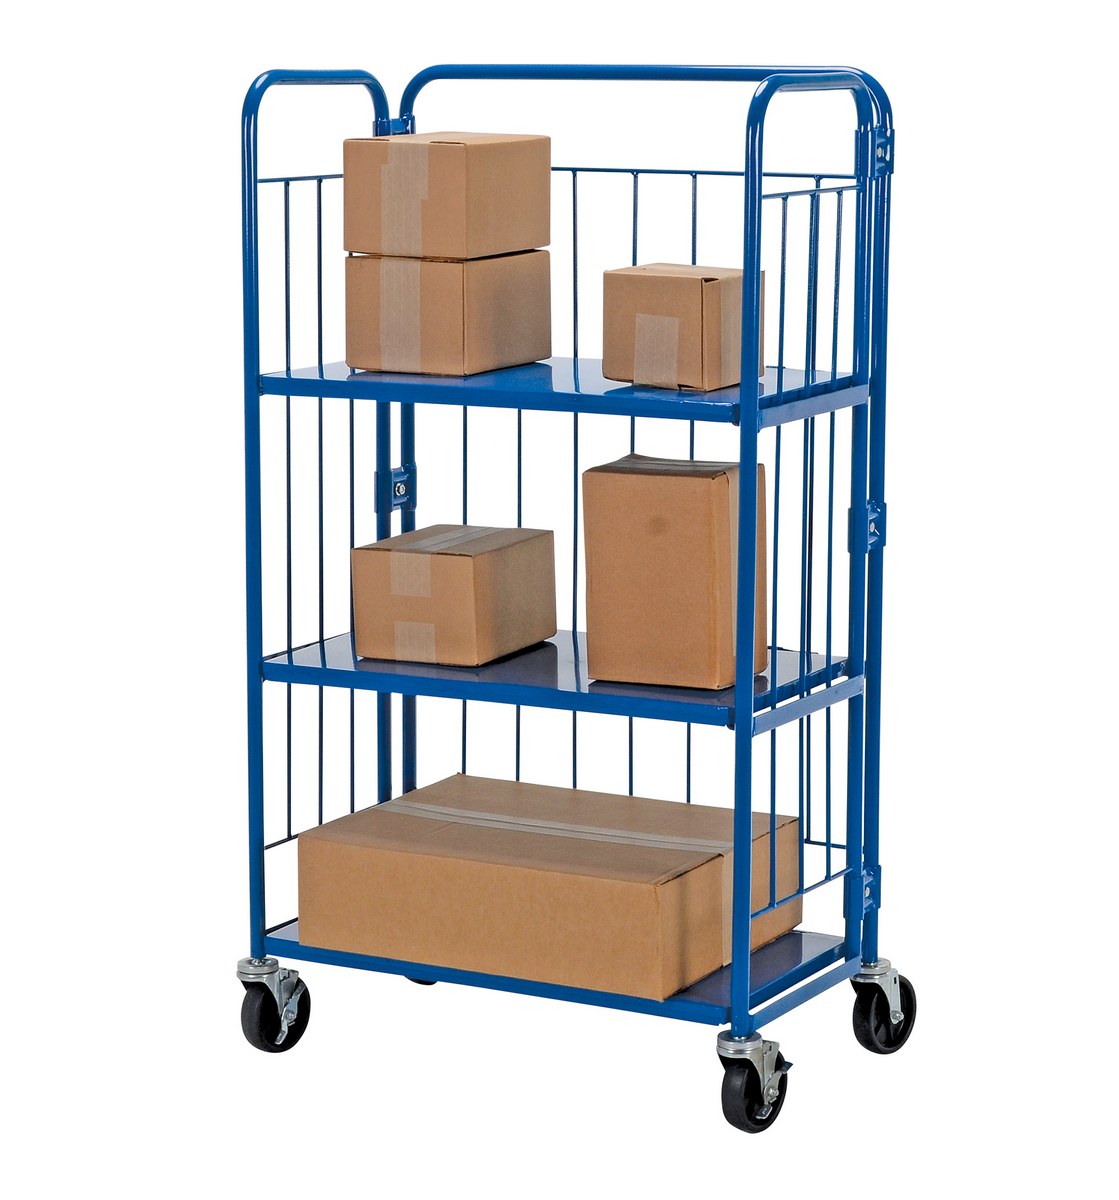 Foldable/Nestable Roller Container 3 Shelves 34" x 18" x 59"